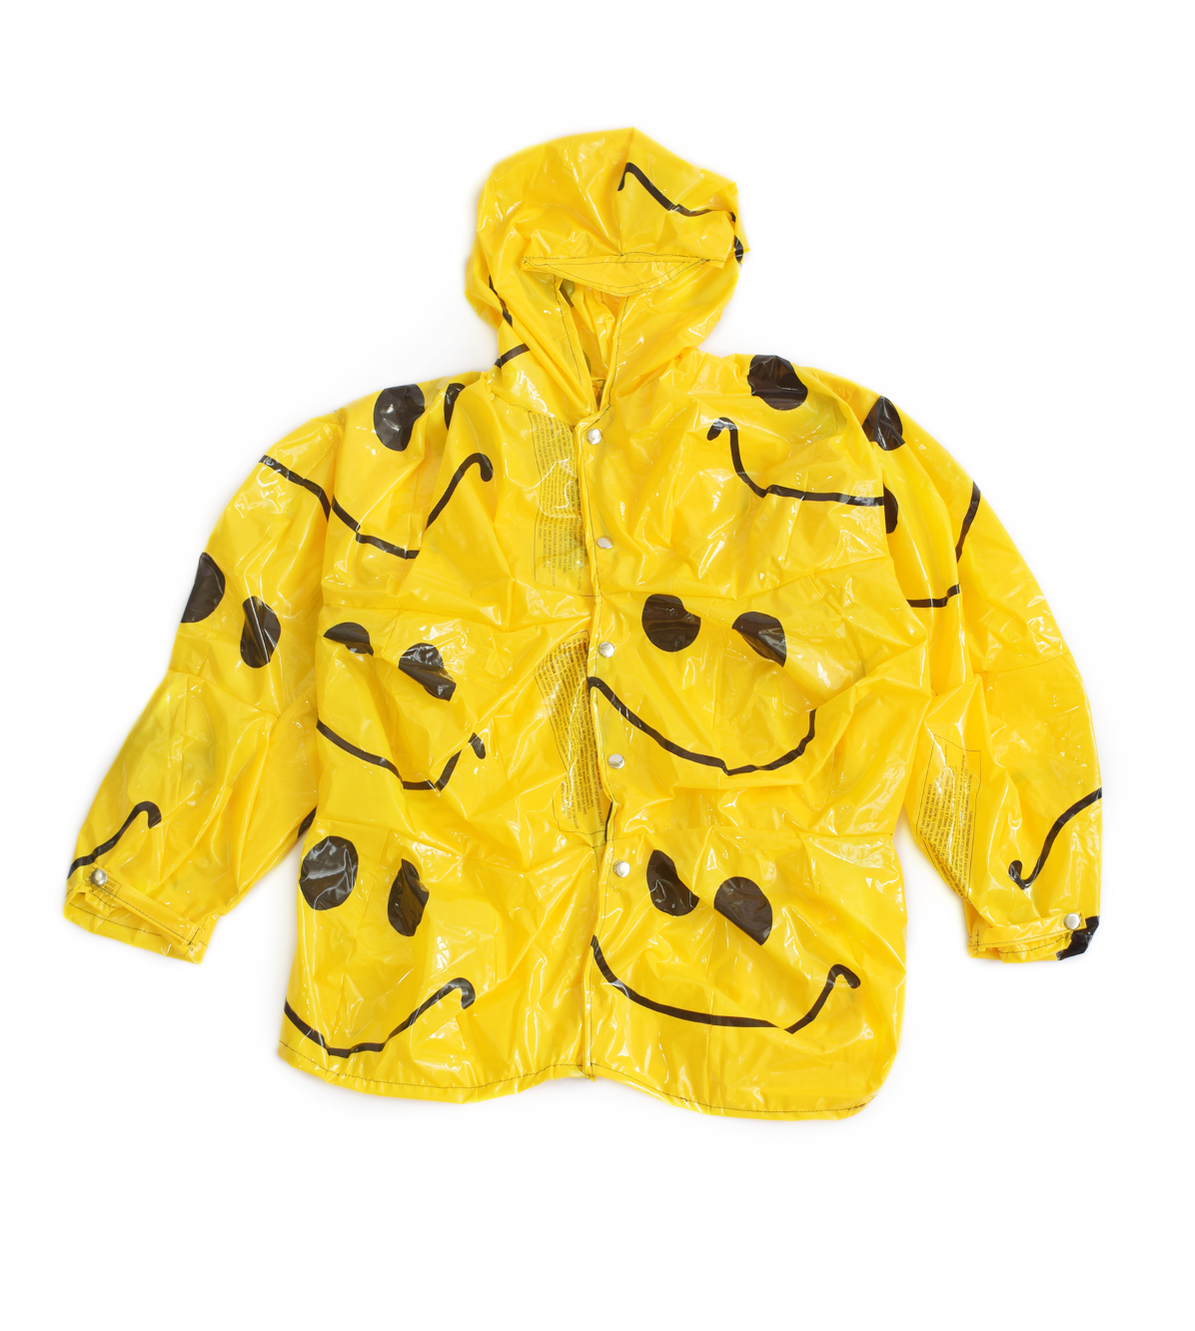 Yellow jacket with abstract black shapes, styled for a bold fashion statement